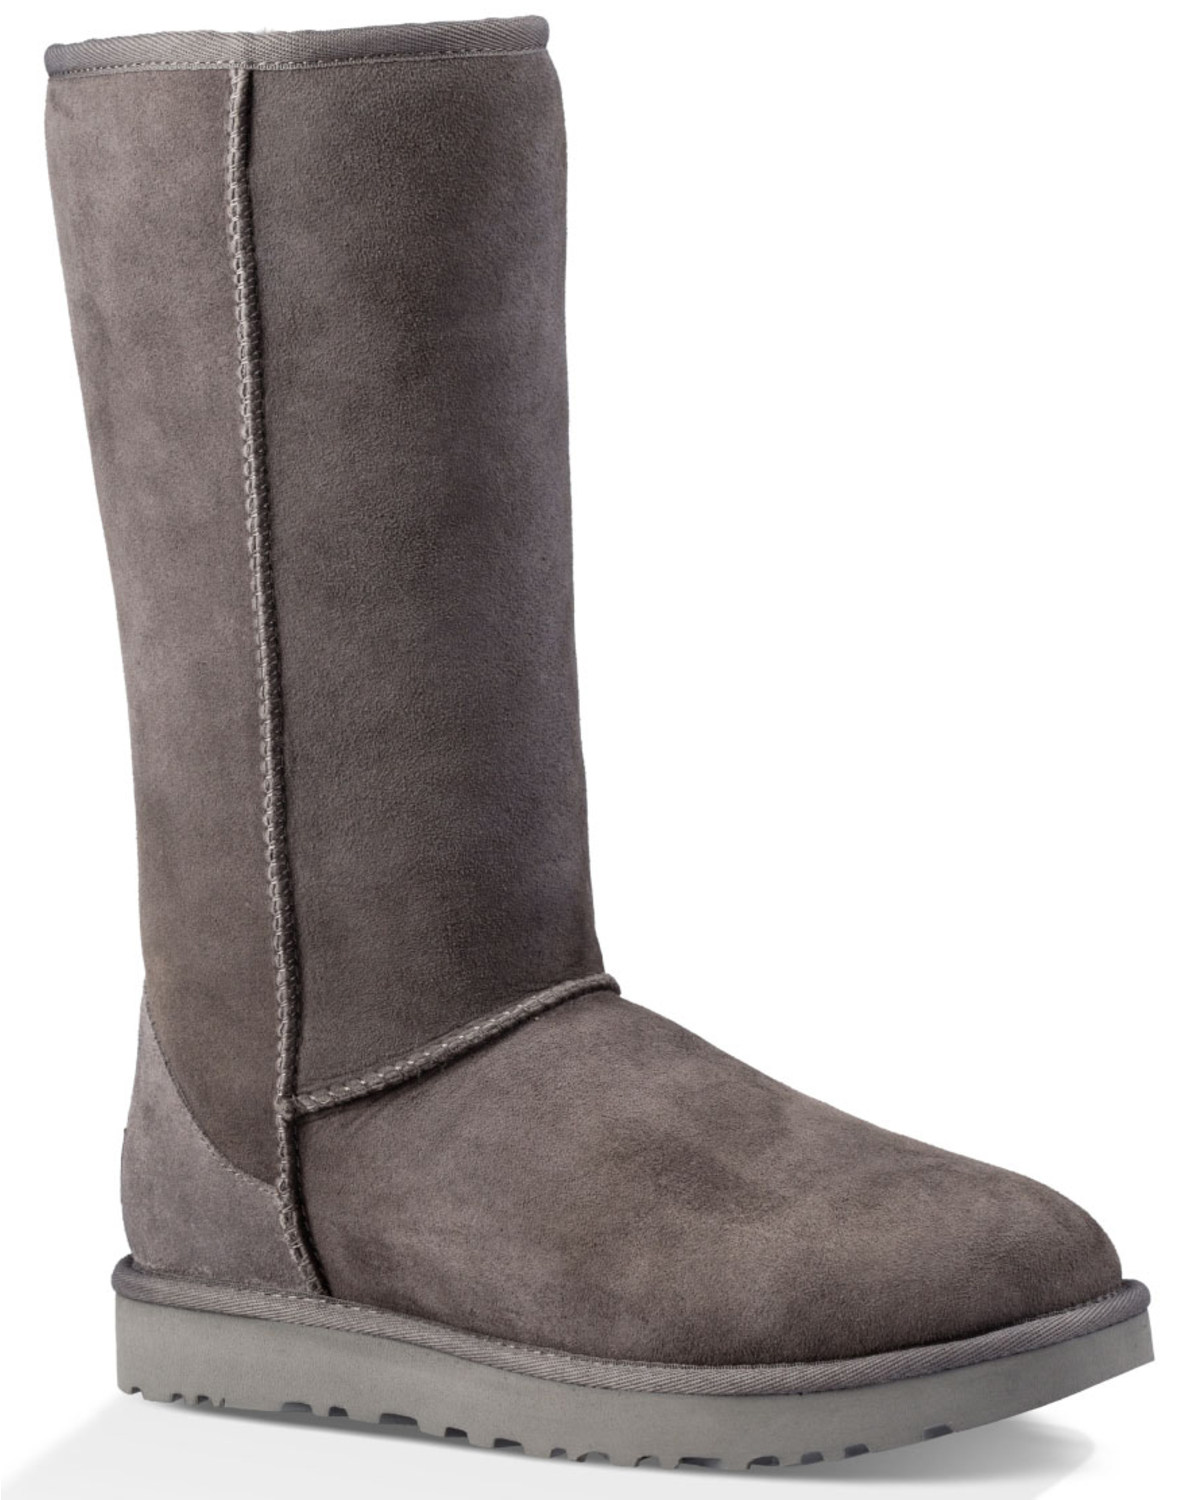 grey uggs boots